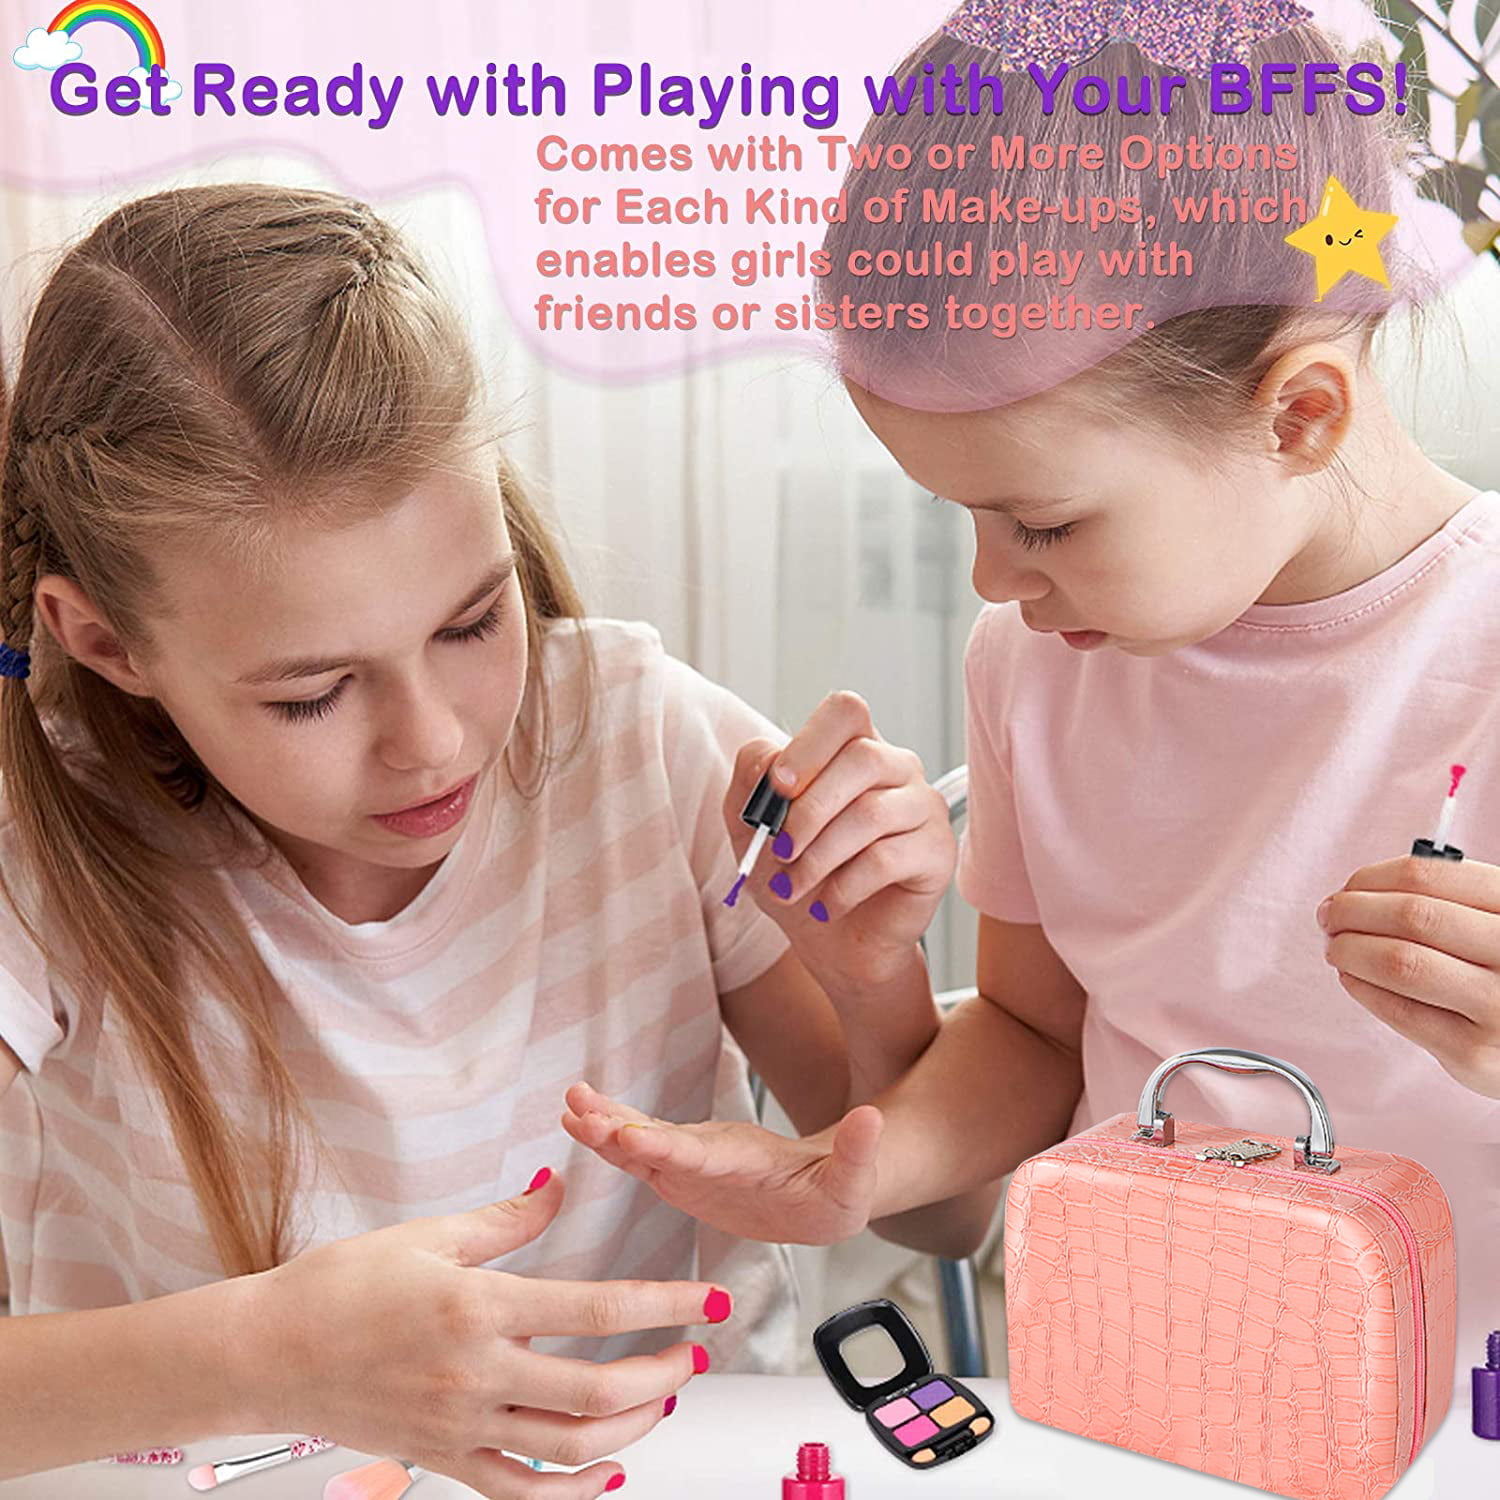 Kids Pretend Makeup Kit with Cosmetic Bag for Girls 4-10 Year Old -  Including Pink Brushes, Eye Shadows, Lipstick, Mascare, Gittler Pot, Liquid  Foundation, Nail Polish and More (Not Real Makeup) 